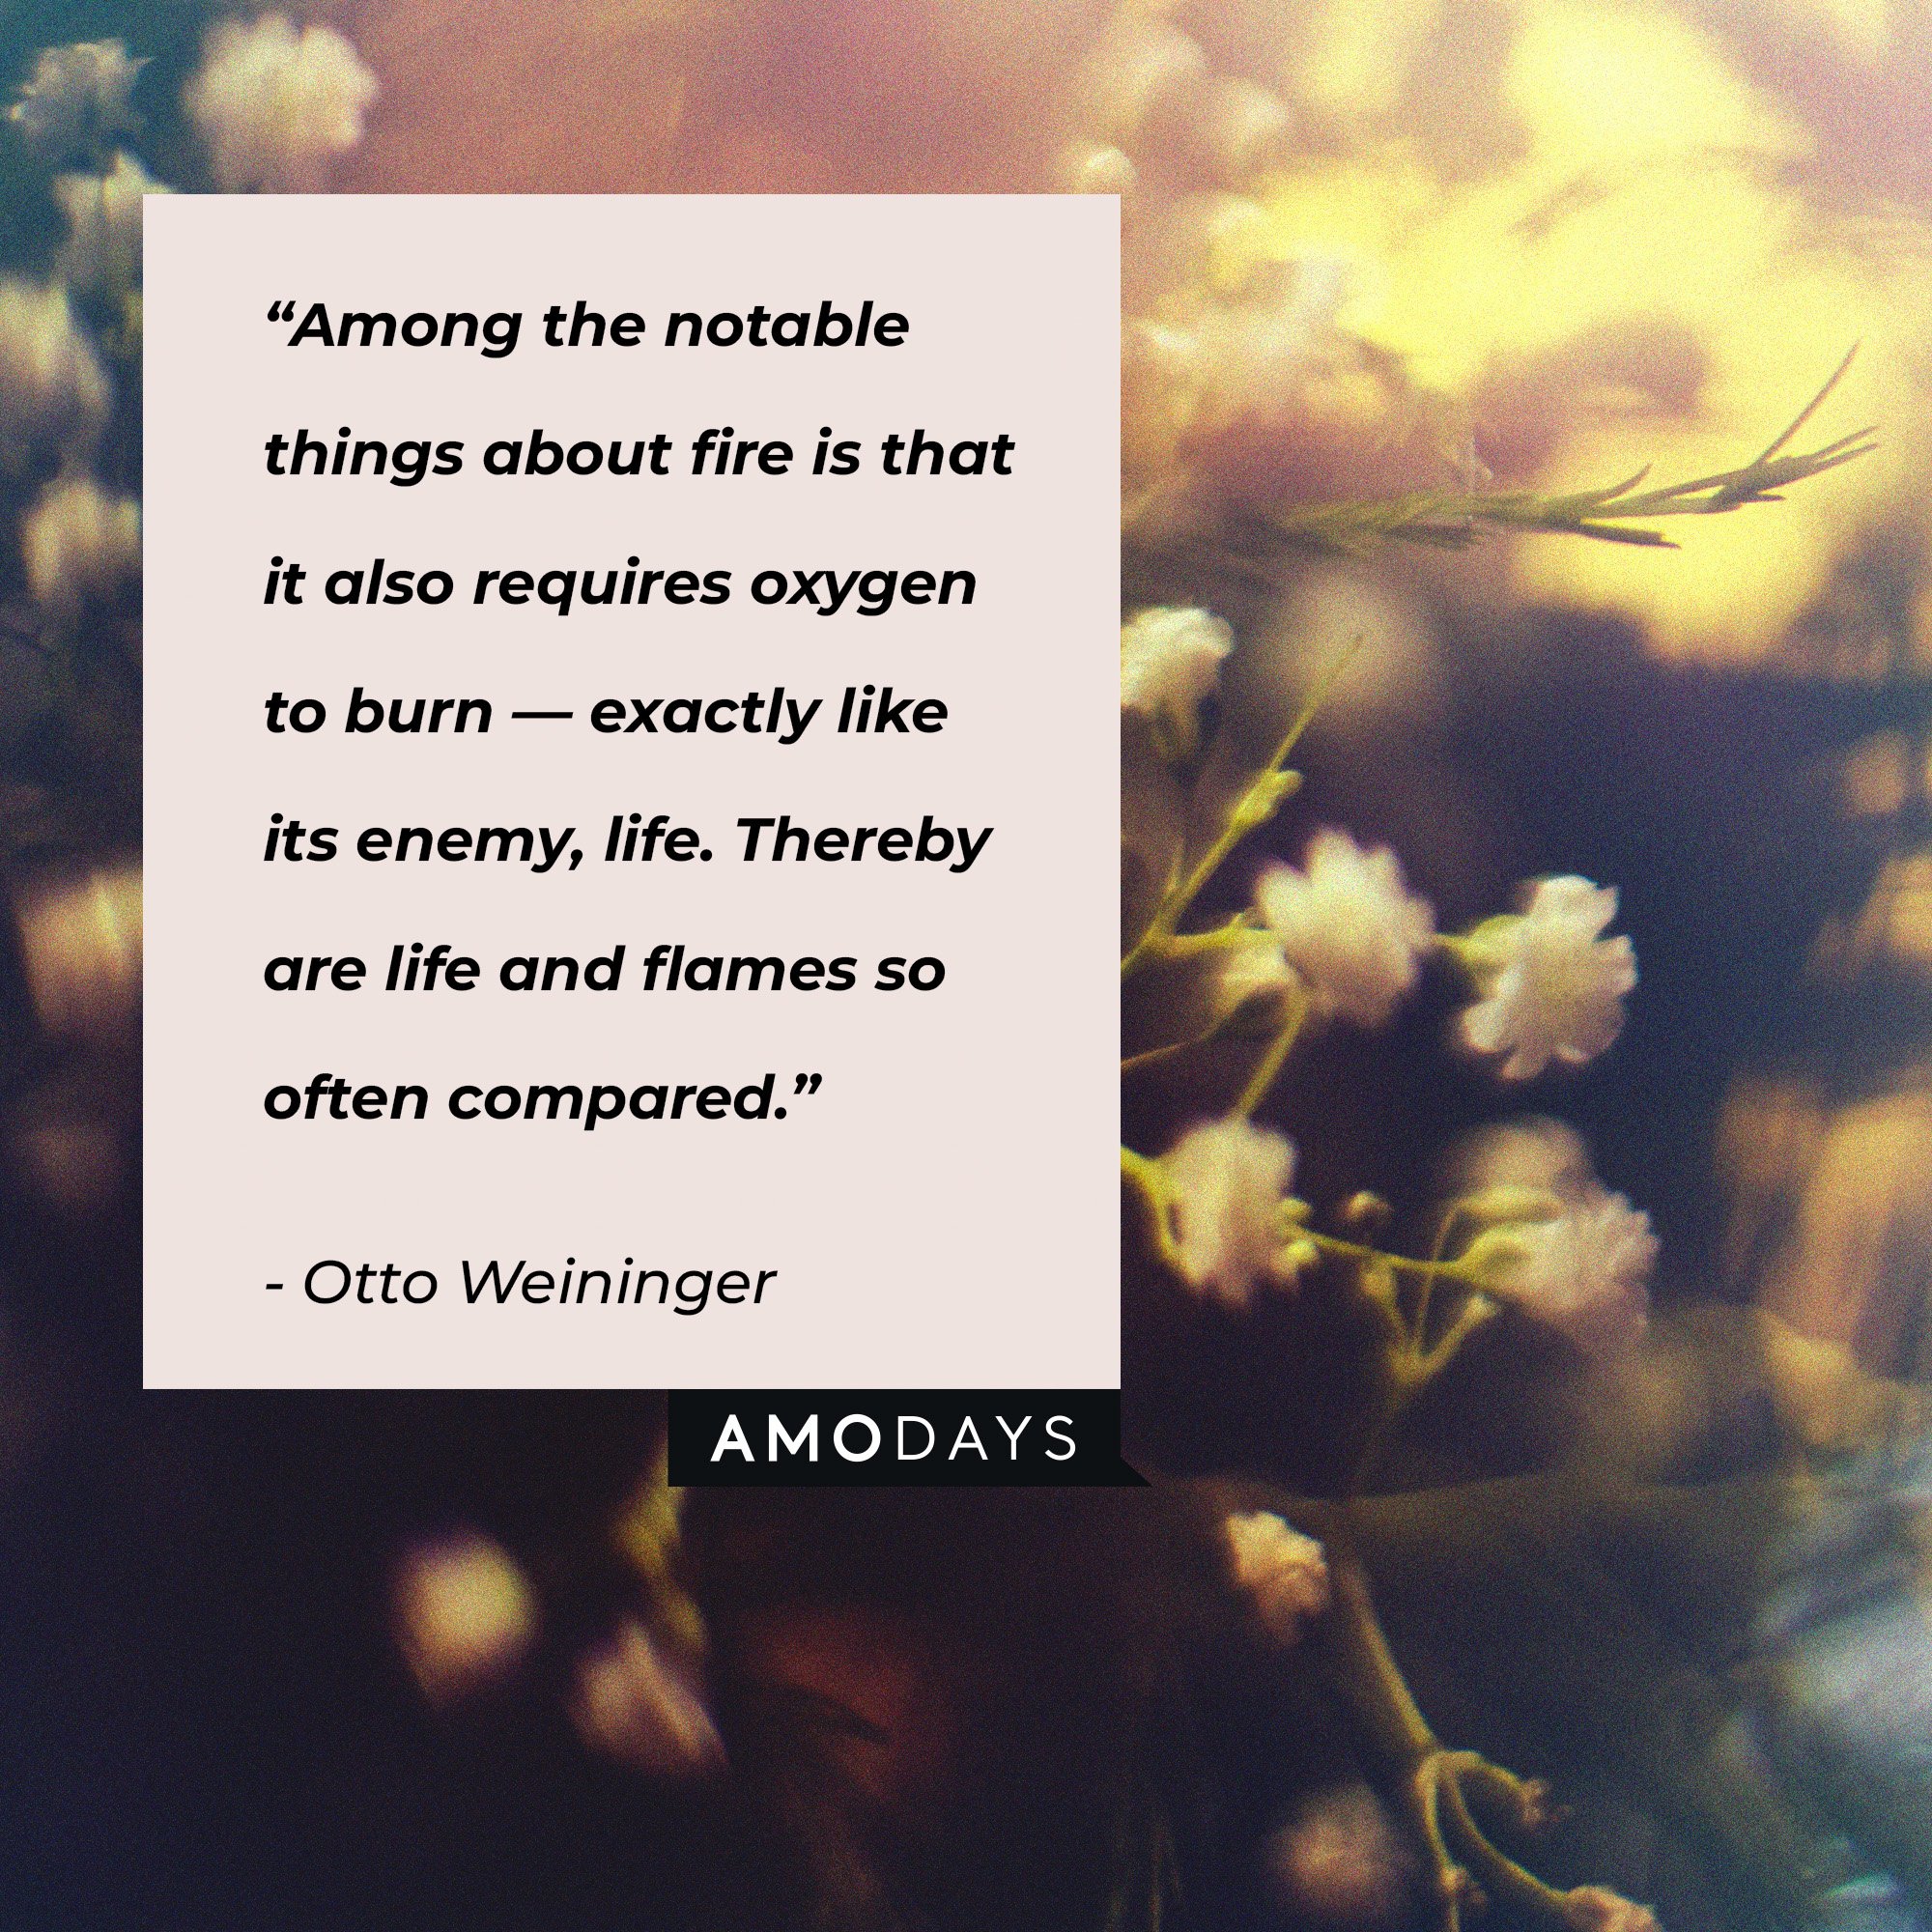 Otto Weininger's quote: “Among the notable things about fire is that it also requires oxygen to burn — exactly like its enemy, life. Thereby are life and flames so often compared.” | Image: AmoDays